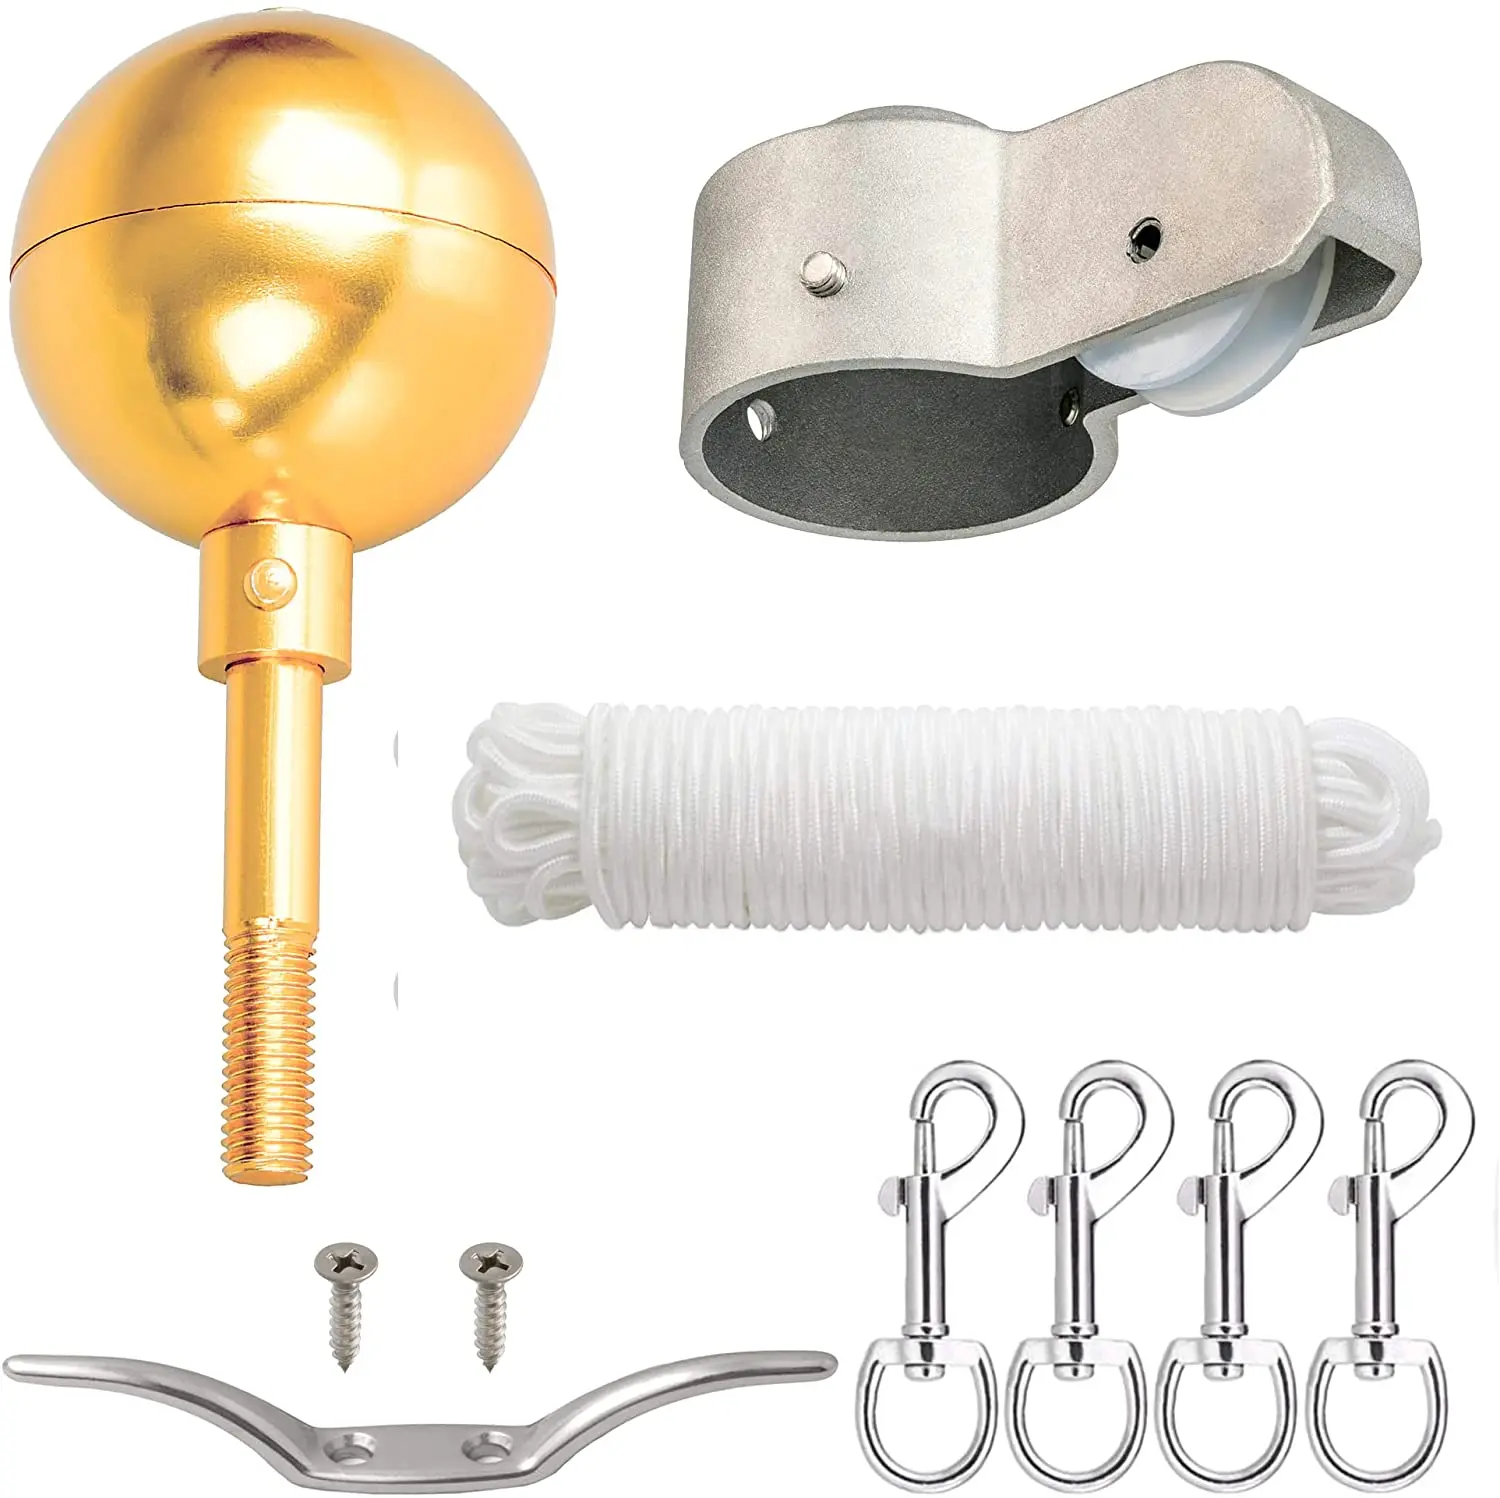 DIYARTS Flag Pole Parts Repair Kit Truck Pulley Replacement Accessories Hardware Gold Ball Cleat Hook 